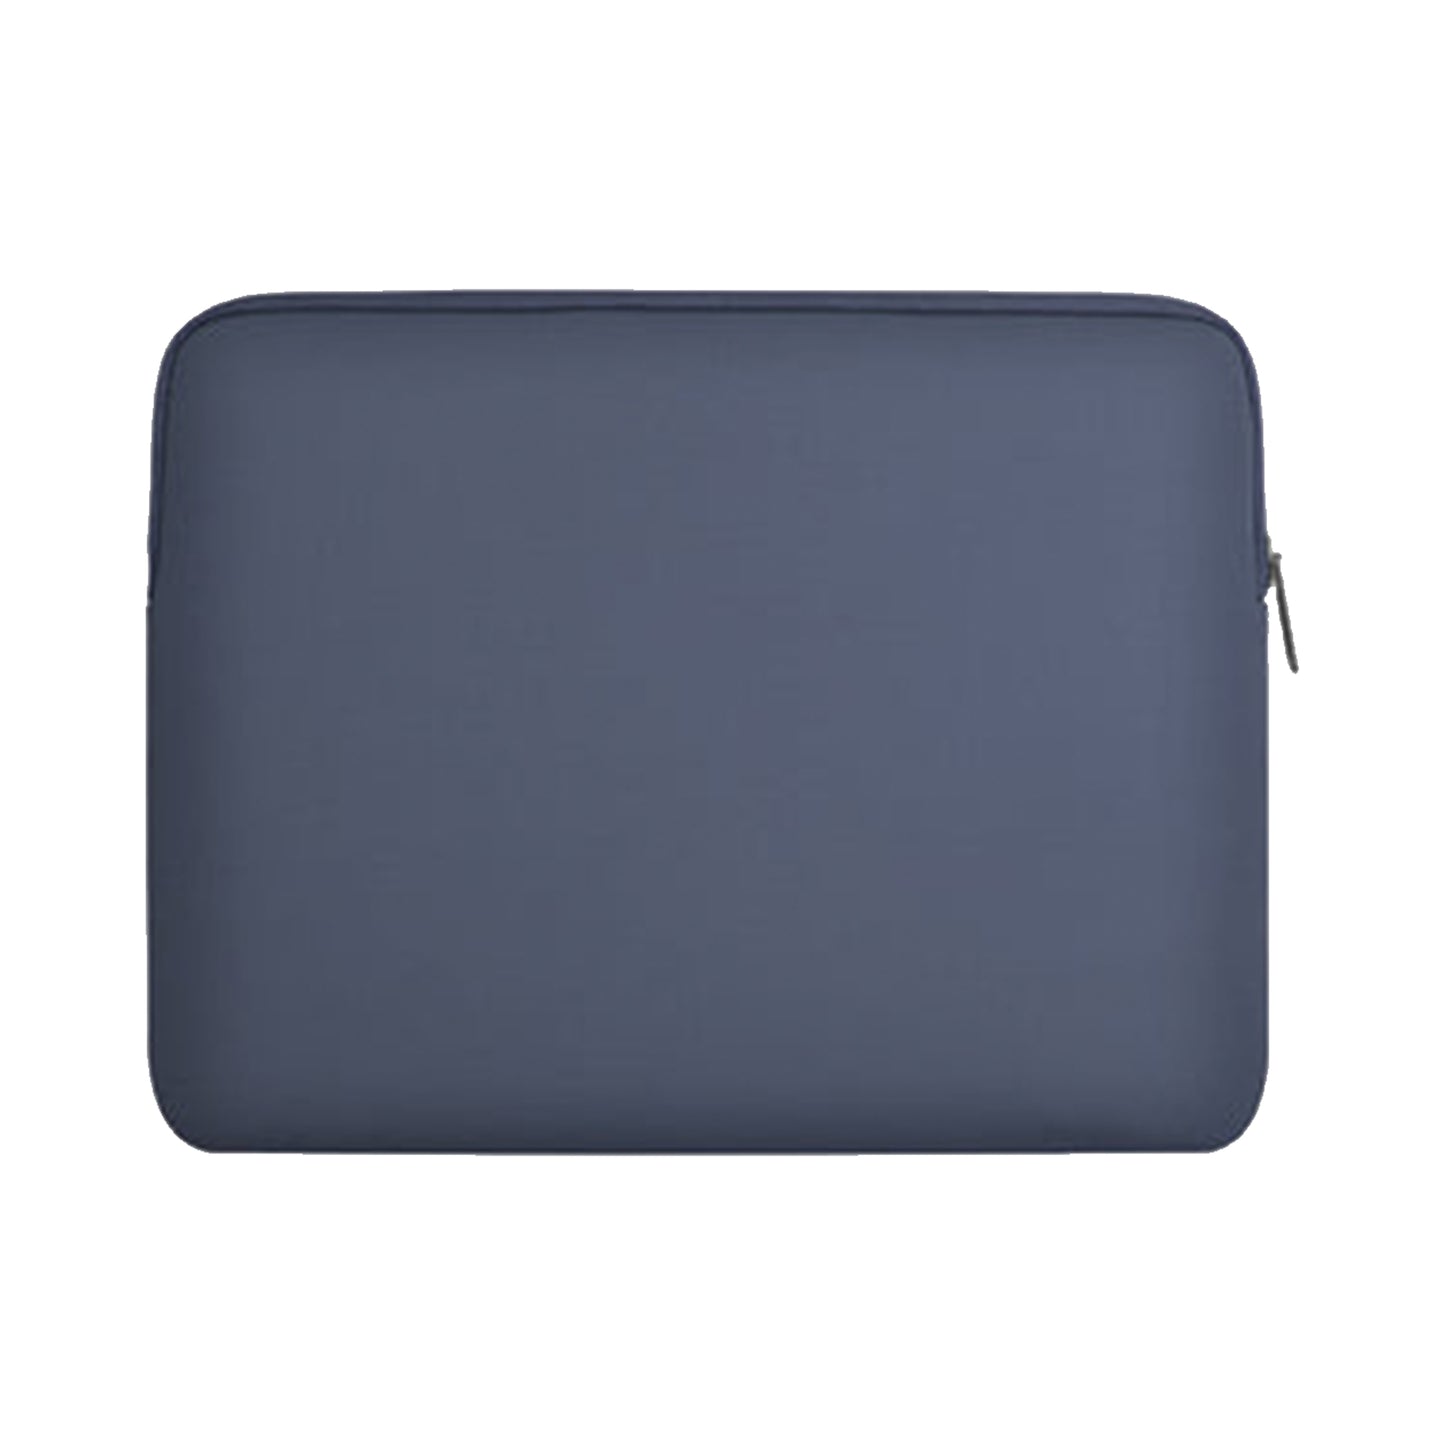 UNIQ Cyprus Laptop and Tablet Sleeve - Water Resistant Neoprene Up to 14" - 14 inch - Abyss Blue ( Barcode: 8886463680728 )